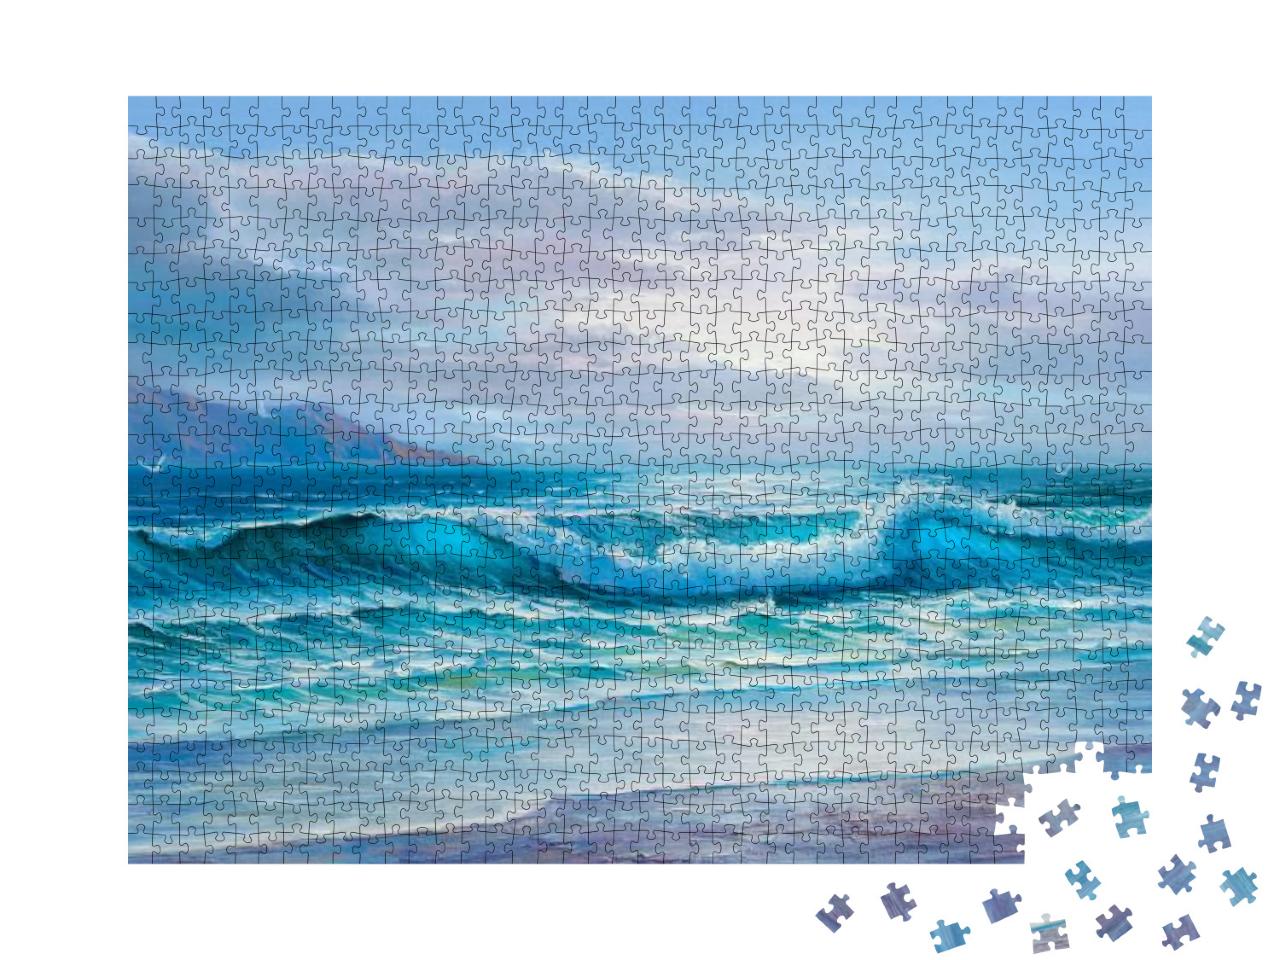 Morning on Sea, Wave, Illustration, Oil Painting Paints o... Jigsaw Puzzle with 1000 pieces